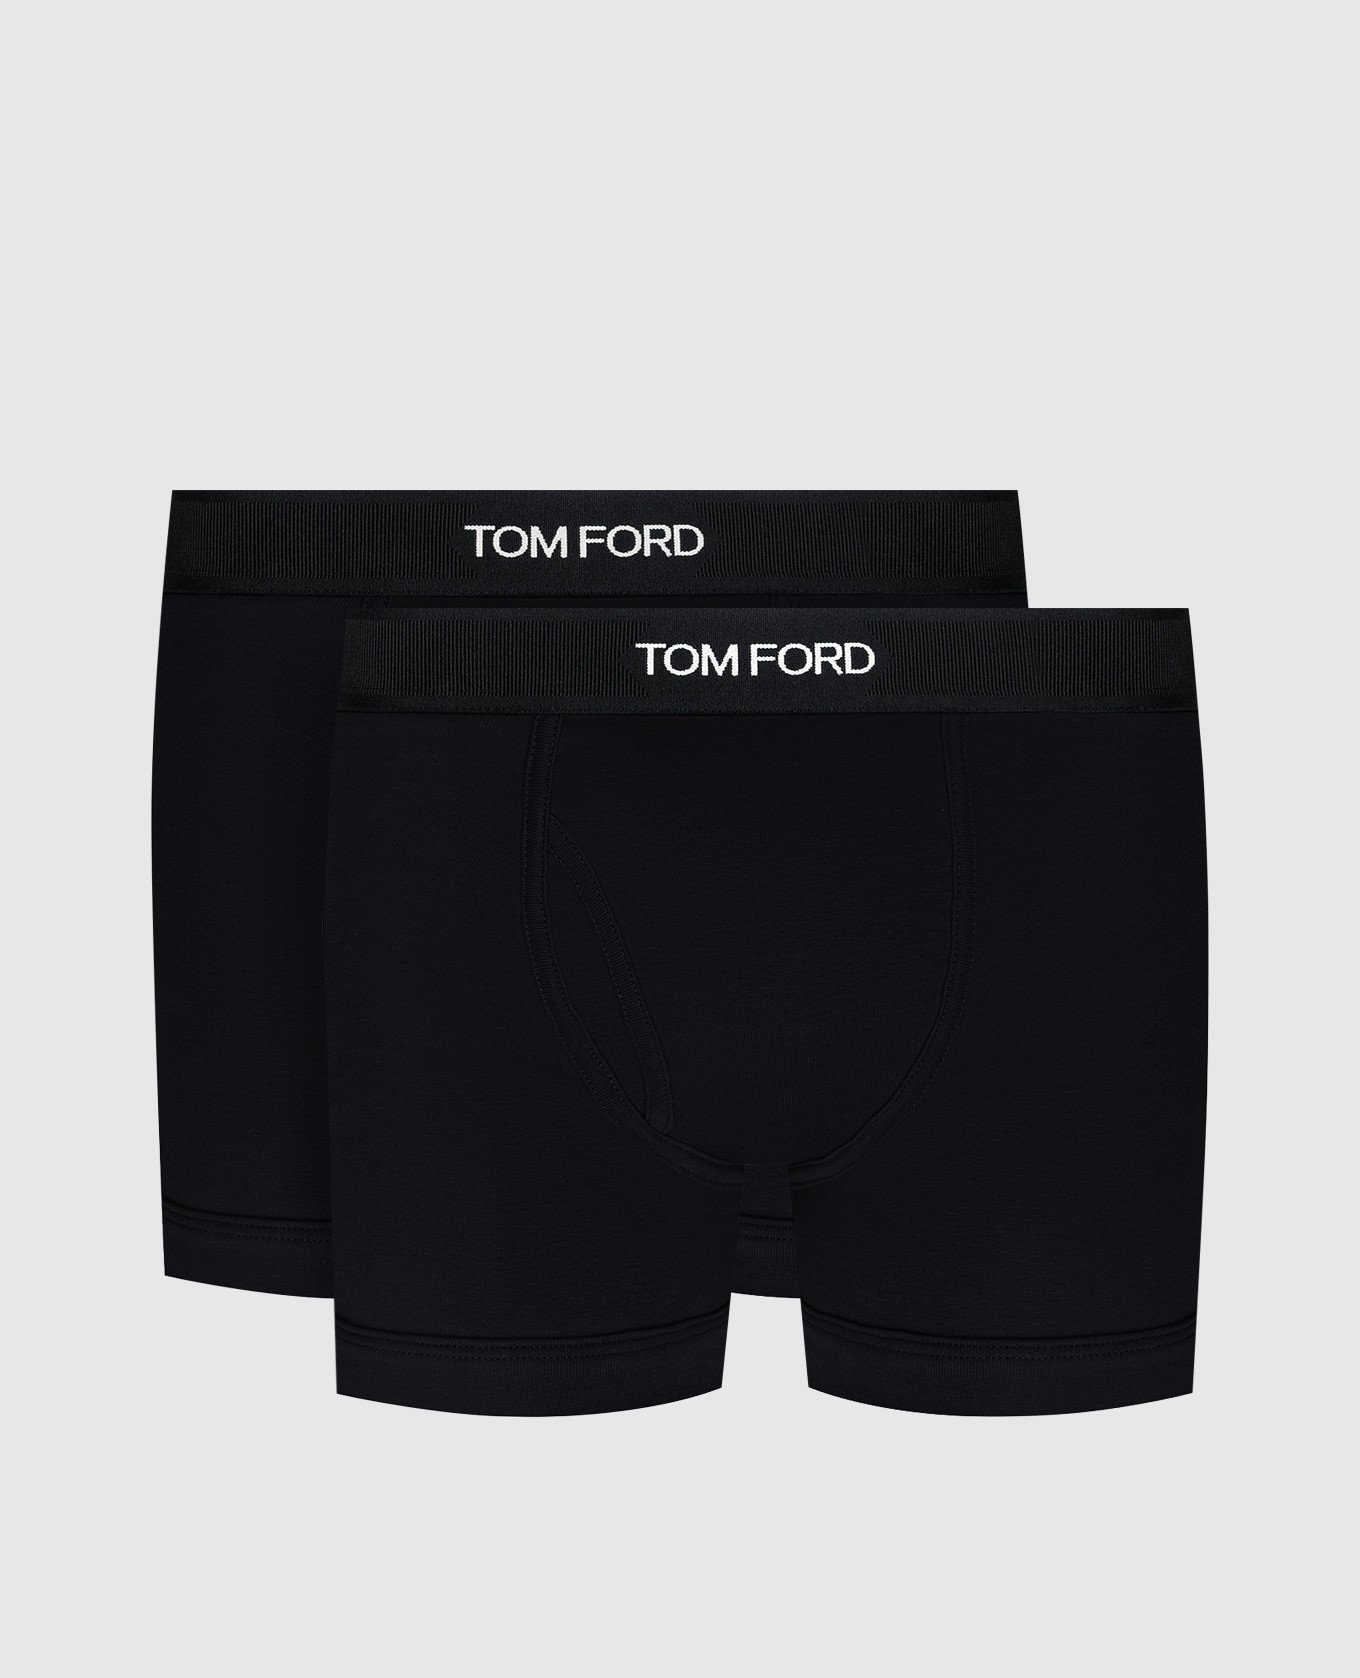 A set of black boxer briefs with a logo pattern